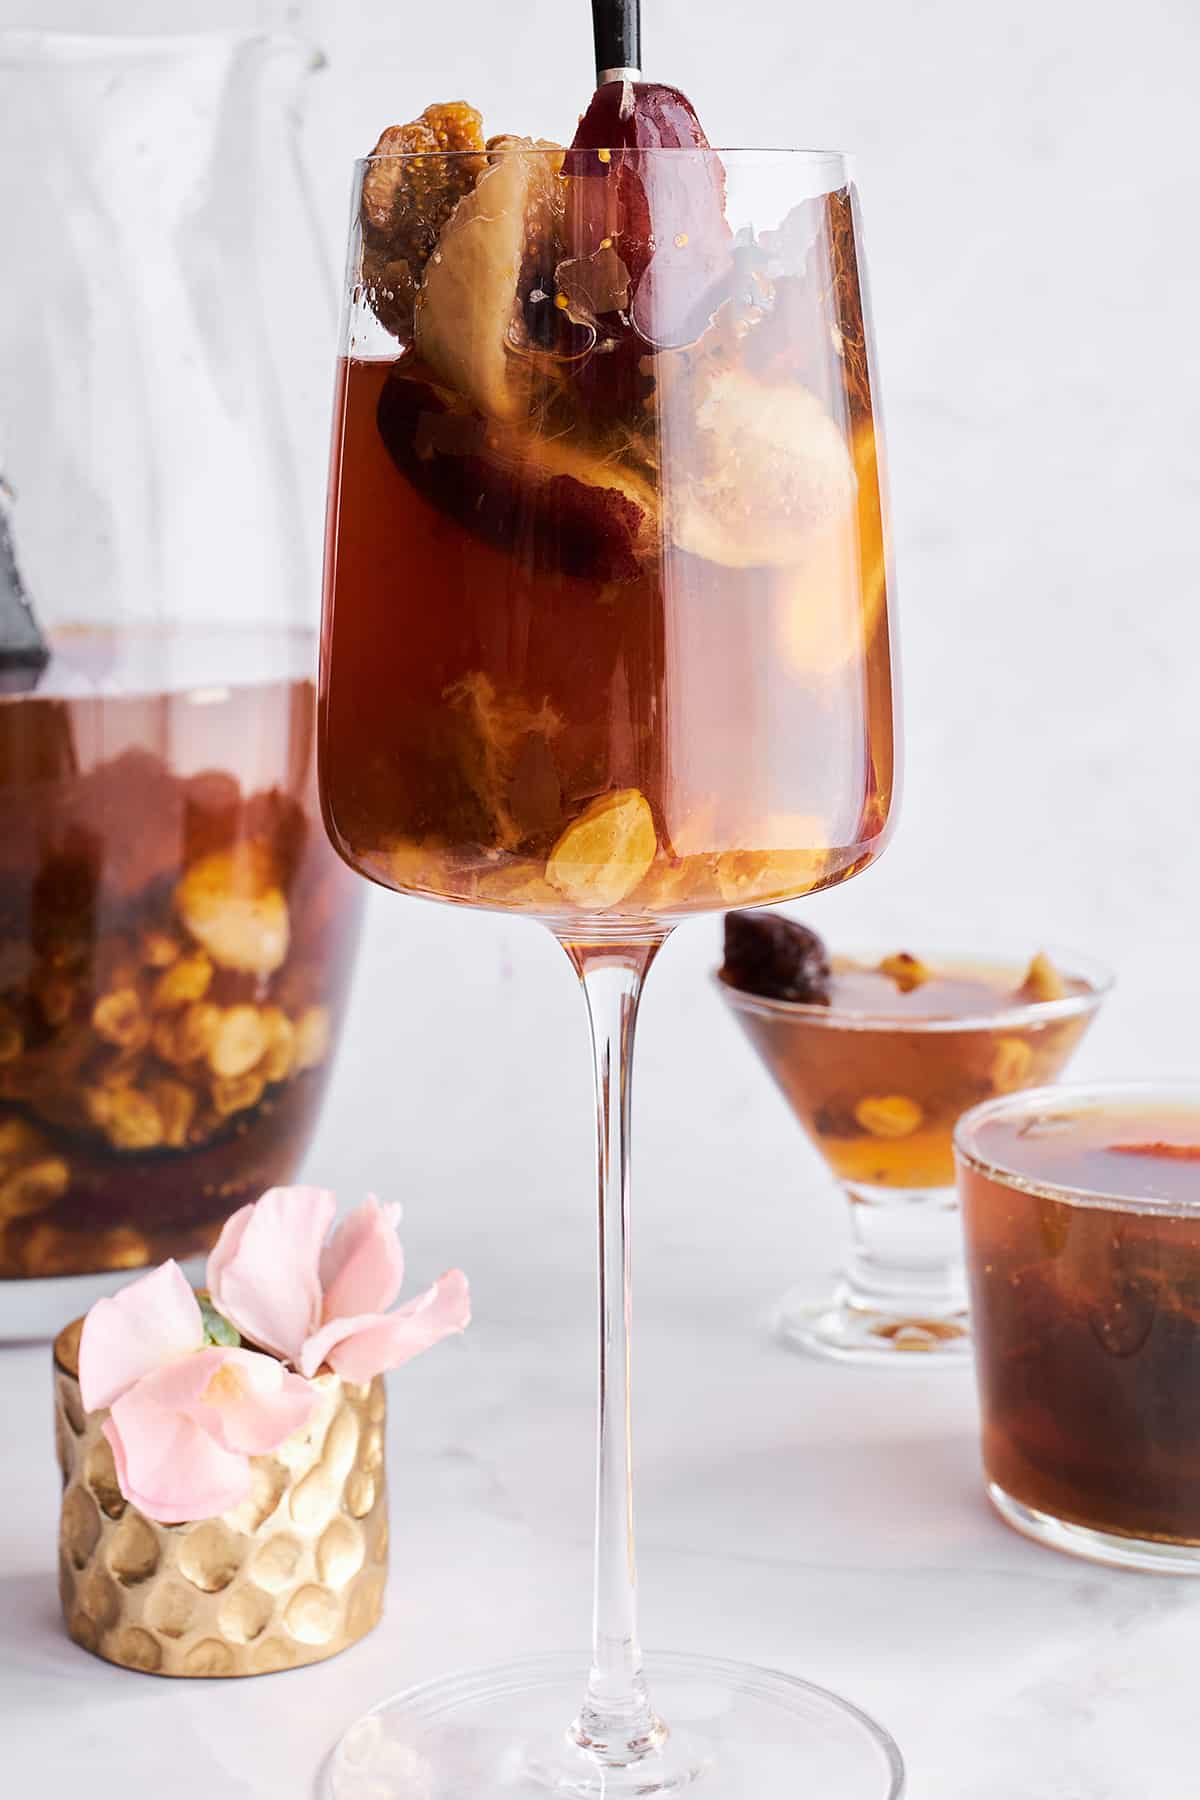 Glasses of dried fruit compote drink.